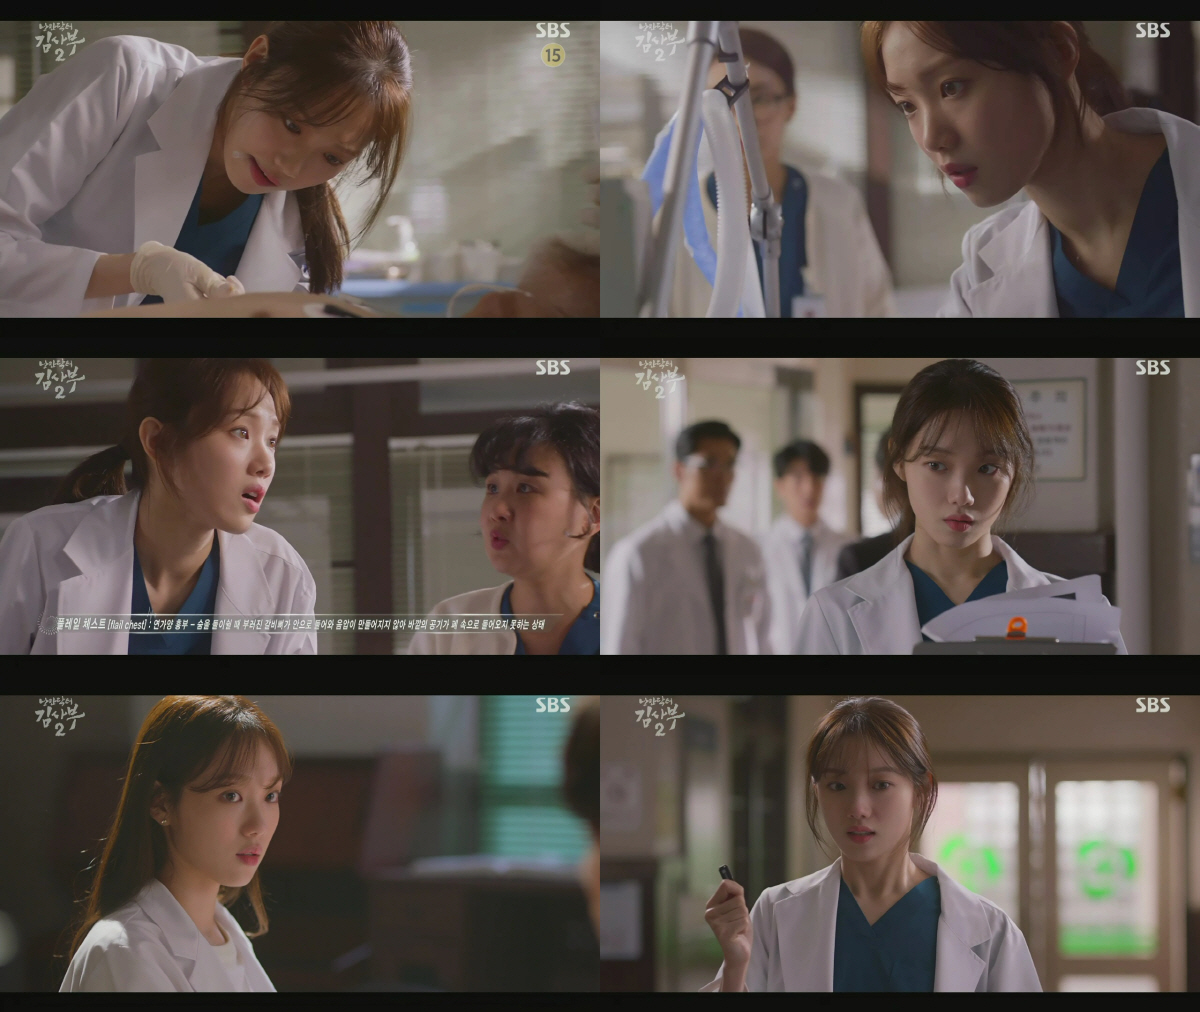 Actor Lee Sung-kyung made the audience feel open with his Cida performance.In the 4th episode of SBS monthly drama Romantic Doctor Kim Sabu 2 (playplayed by Kang Eun-kyung, directed by Yoo In-sik, Lee Gil-bok) broadcasted on the 14th, Cha Eun-jae (Lee Sung-kyung) played a decisive role in rescuing Kim Sabu (Han Suk-kyu) who was in the Danger of the complaint due to medical negligence.Park Min-guk (Kim Joo-heon) and Yang Ho-joon (Ko Sang-ho) started to say that there is no surgical recording to cover up the second surgical error of Minister of National Defense that they committed to Kim Sa-bu (Han Suk-kyu).However, Eun Jae, who came across the existence of USB with the video, refused their proposal to send it to the main office if he kept the secret.And she exposed all this in front of the son of Minister Ministry of National Defense, giving viewers a sense of excitement.In the surprise performance of Eunjae, who seemed to not choose the means and methods to go to the main place, viewers cheered, I knew that Eunjae would do it, I am becoming a true member of Doldam Hospital, I am cool.This is not the only thing. On this day, Eunjae successfully completed the first aid treatment by noticing that the patients symptoms were flail chest in an emergency situation.I looked at her with all the surgeries, but Eunjae passed Danger with a professional quick response without shaking.Kim Sabu, who watched all of this process, said, The response was quick.It is your first patient. For the first time, I acknowledged my ability, I am very good at learning. The appearance of Eunjae, who is immediately elated, causes laughter.Those who see in the cute aspect of Eunjae who sincerely apologizes to Woojin (Ahn Hyo-seop) for crying and laughing at Kim Sabus words or misunderstanding and saying things are gradually falling in.It is still a poor and unstable youth, but this opportunity has confirmed the growth potential of the family members and Kim Sabu of Doldam Hospital.She is suffering from a painful growth pain, and she is focused on how she will change and act in Doldam Hospital in the future.SBS Romantic Doctor Kim Sabu 2 is a story about Real Doctor in the background of a poor stone wall hospital in the province. It is broadcast every Monday and Tuesday at 9:40 pm.